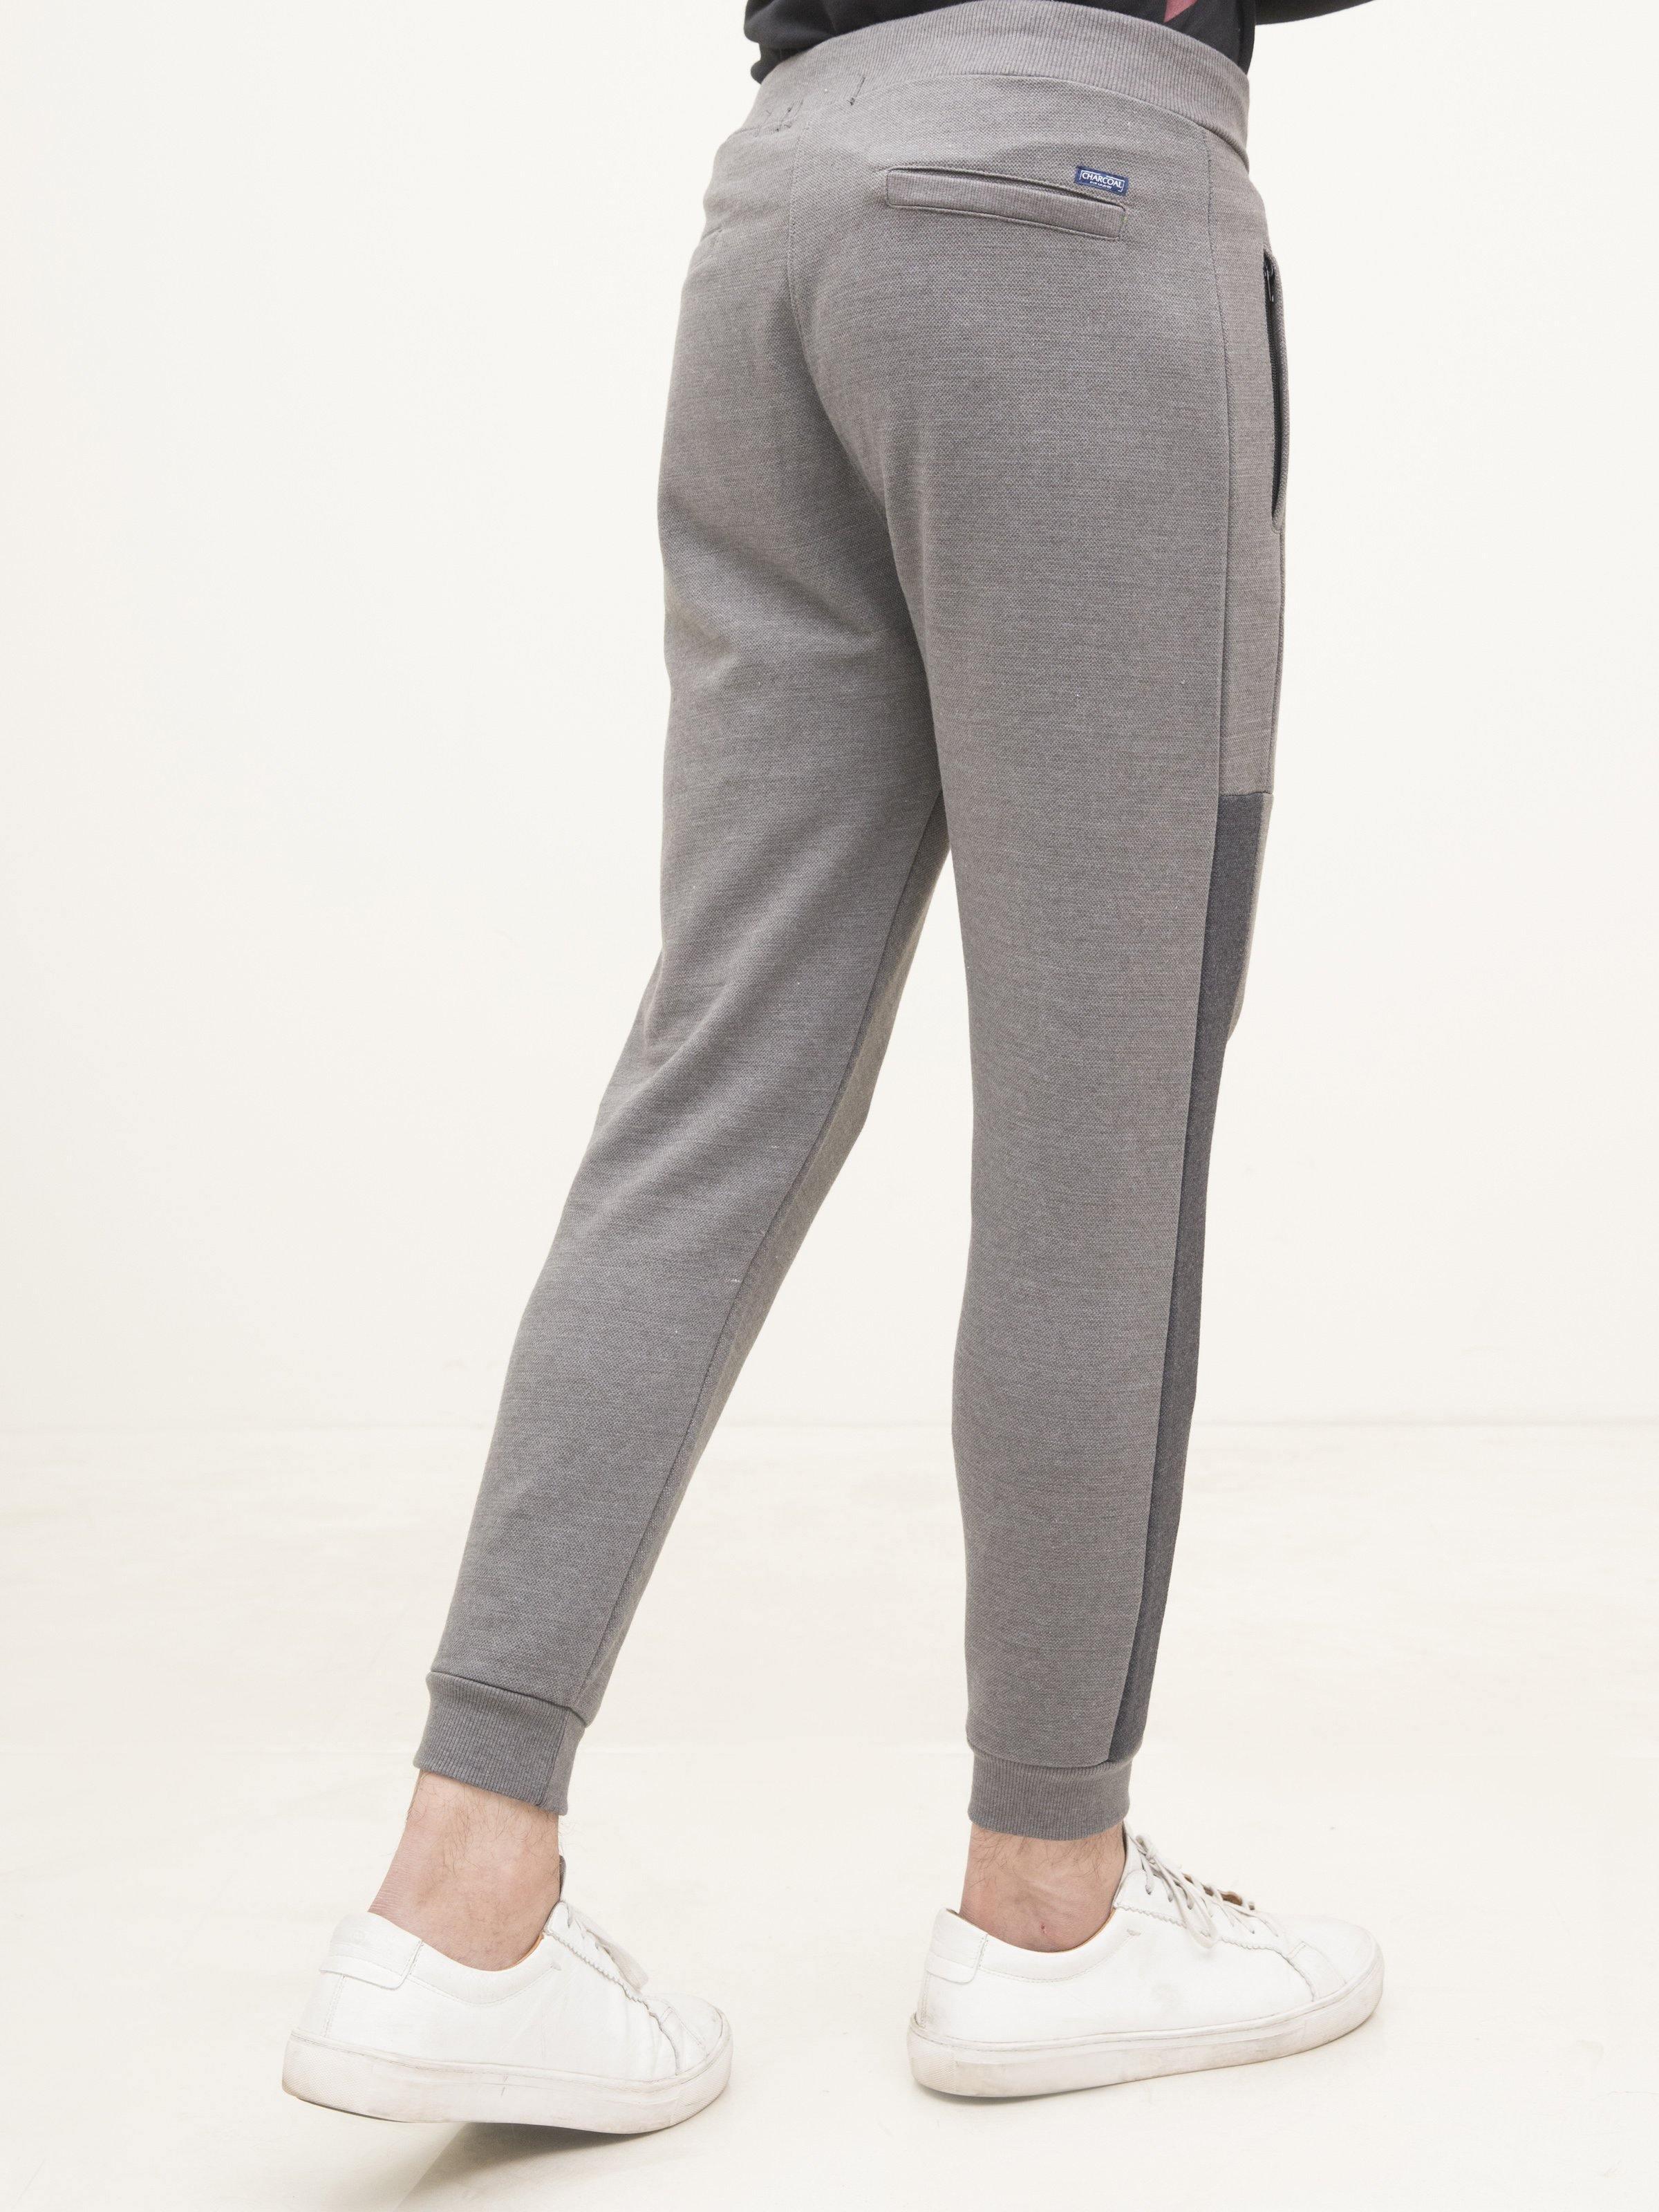 PIQUE FLEECE TROUSER LIGHT GREY at Charcoal Clothing